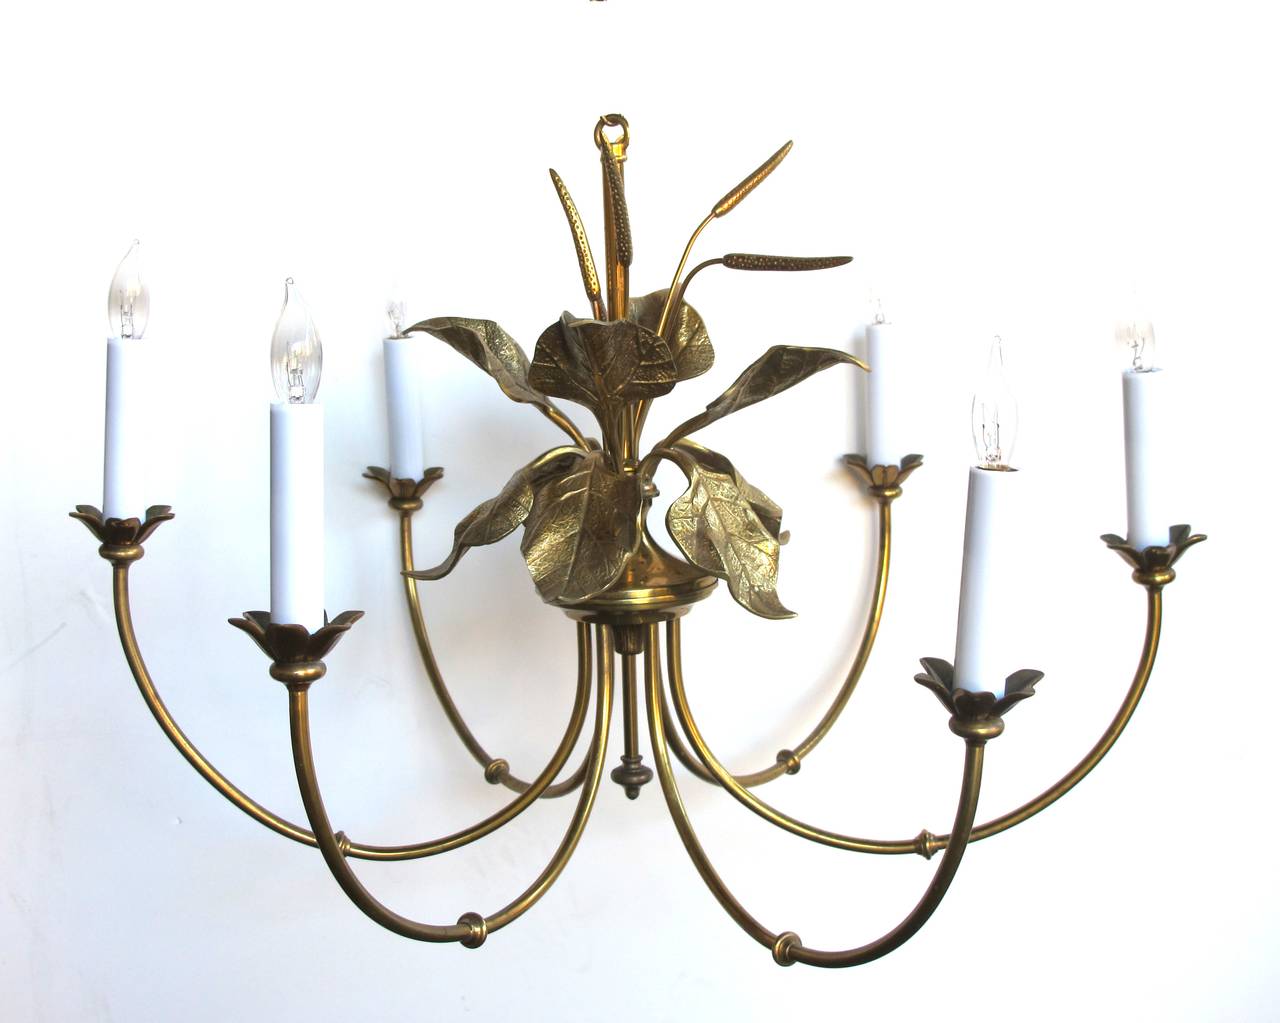 A stylish French mid-century brass six-light chandelier with foliage and cattails by Maison Charles, Paris; the central support emanating lively foliage and cattails surrounded by deeply scrolled arms